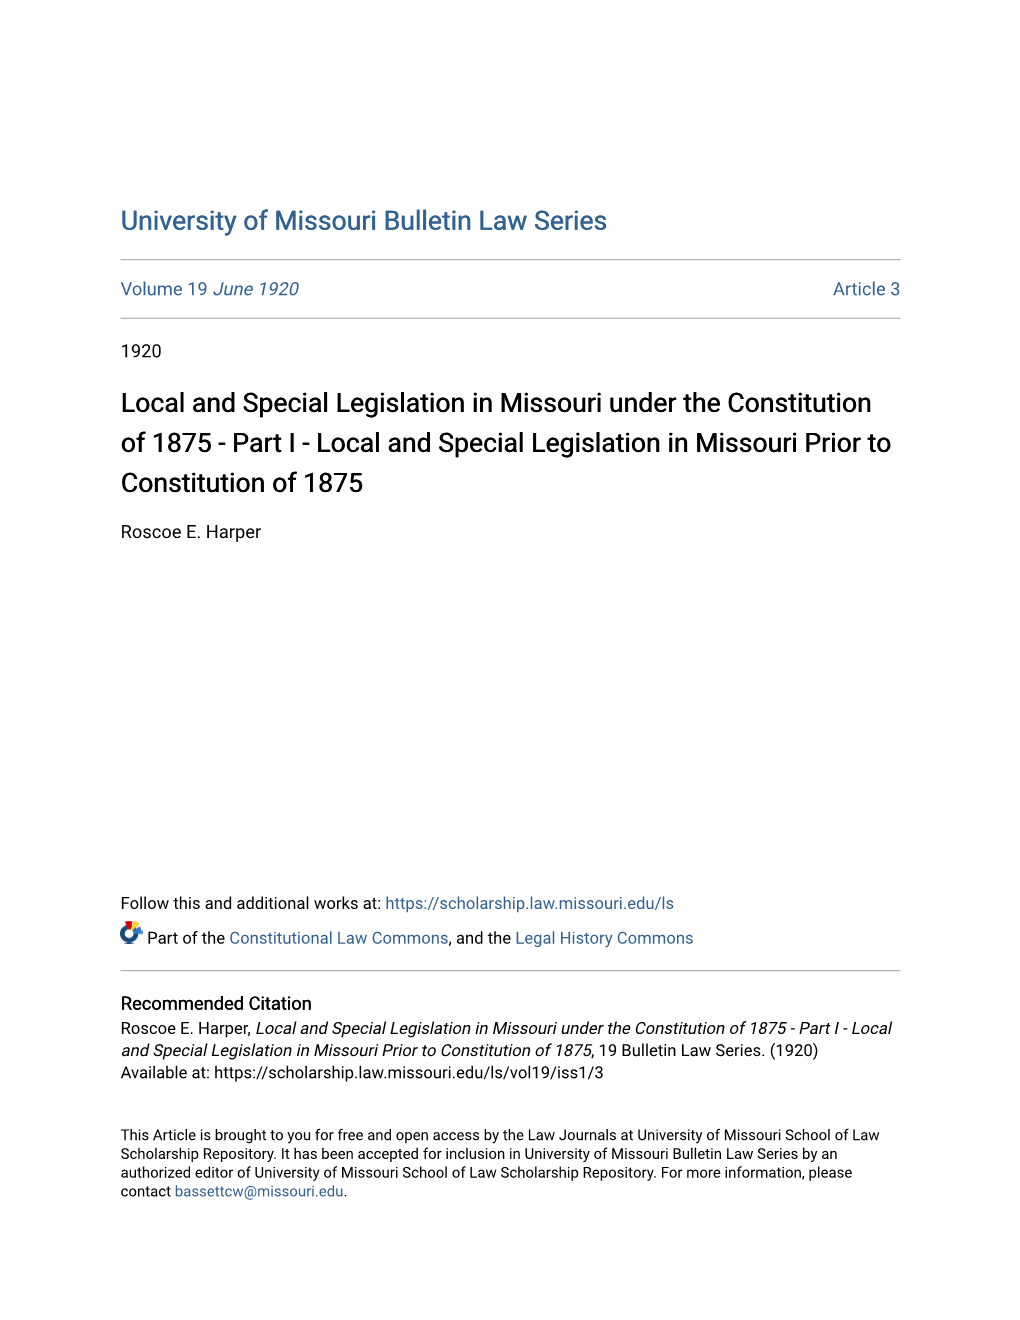 Local and Special Legislation in Missouri Under the Constitution of 1875 - Part I - Local and Special Legislation in Missouri Prior to Constitution of 1875